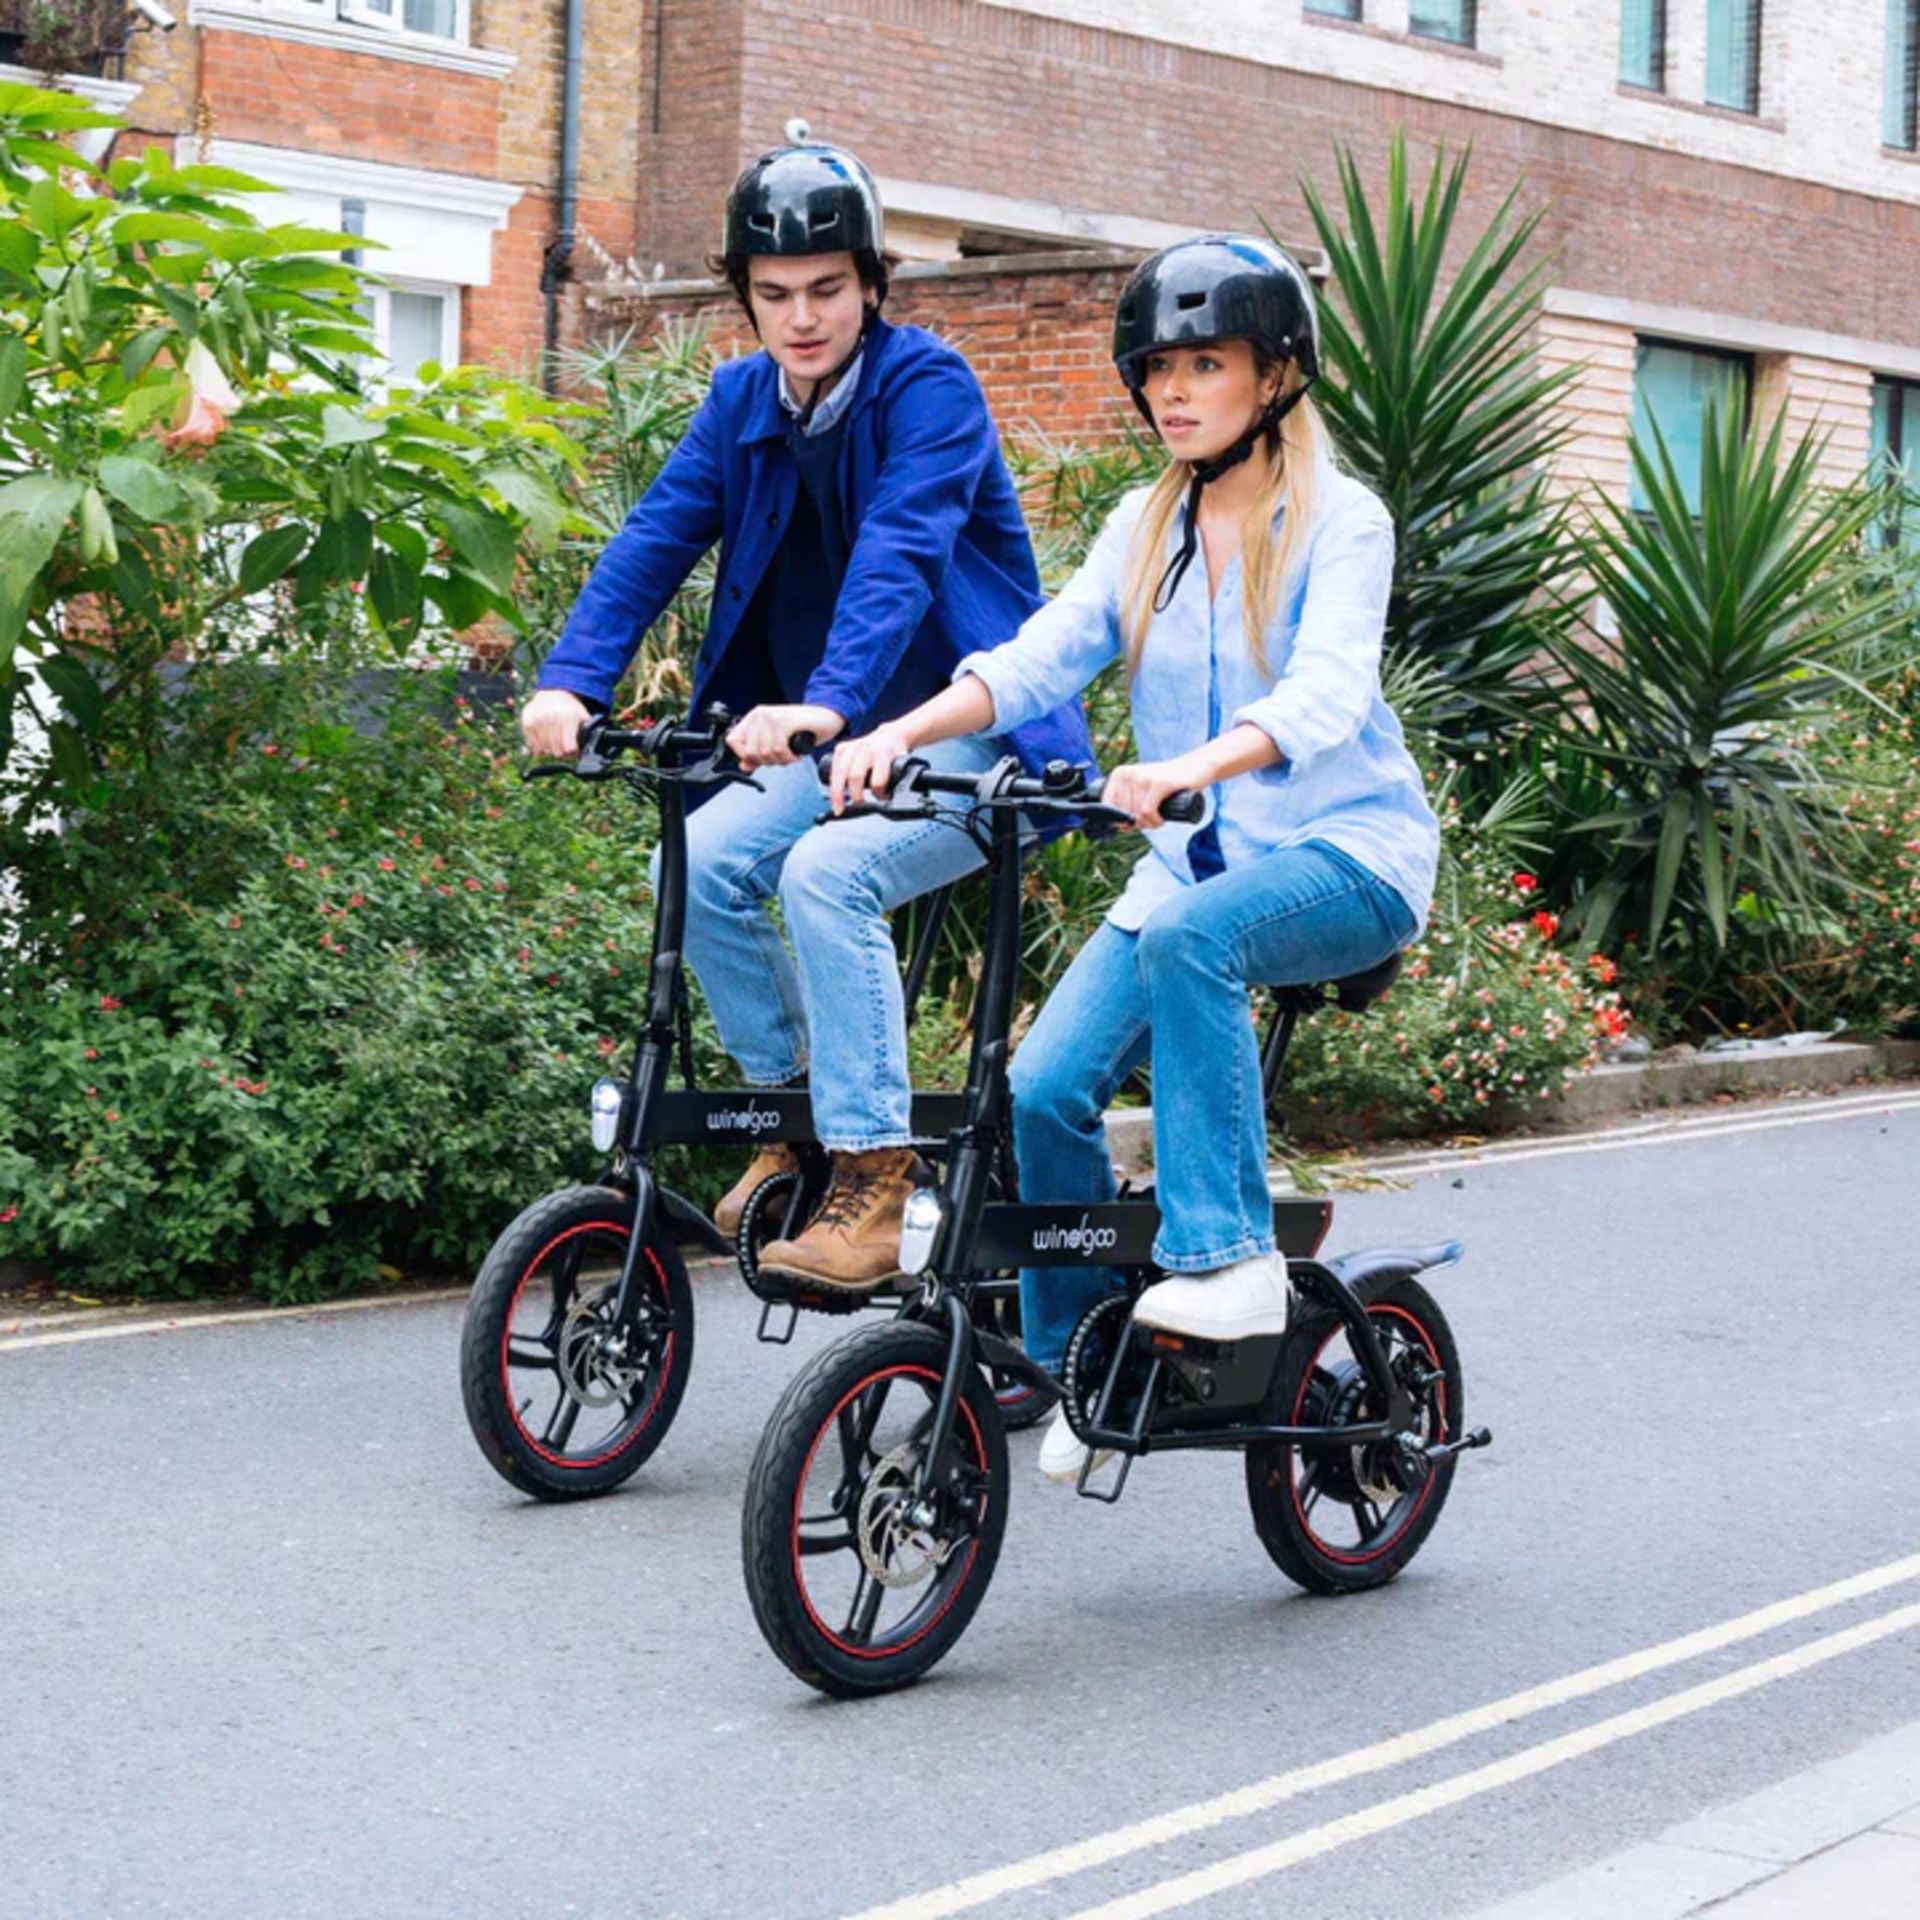 Windgoo B20 Pro Electric Bike. RRP £1,100.99. With 16-inch-wide tires and a frame of upgraded - Image 2 of 7